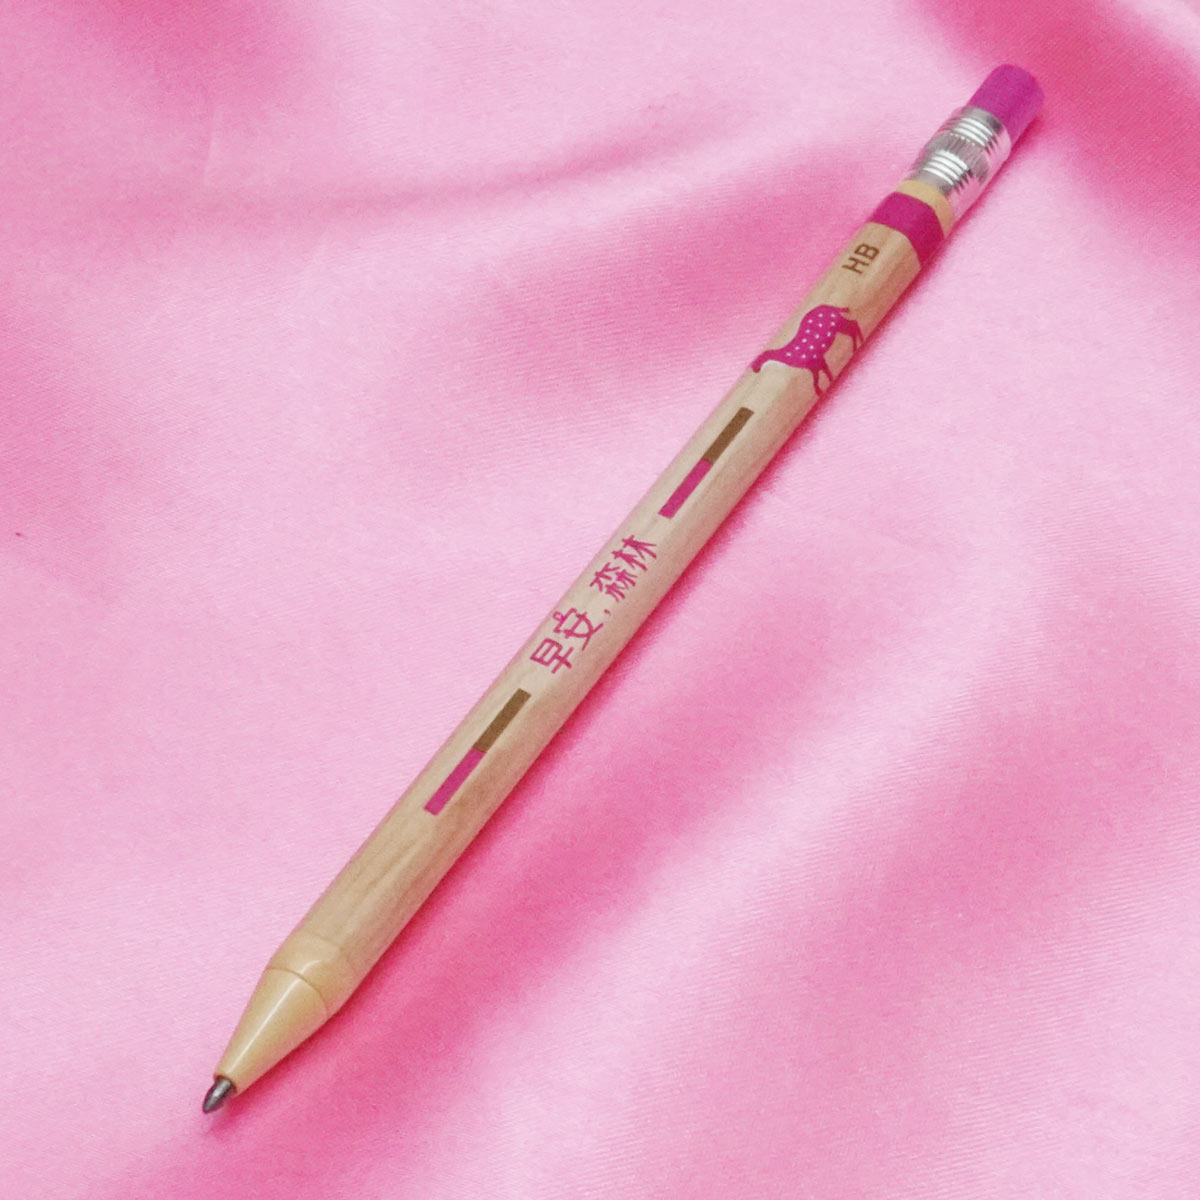 penhouse.in HB 2.0mm Wooden Finish Body Design With Pink Color Click Led Pencil SKU 21519